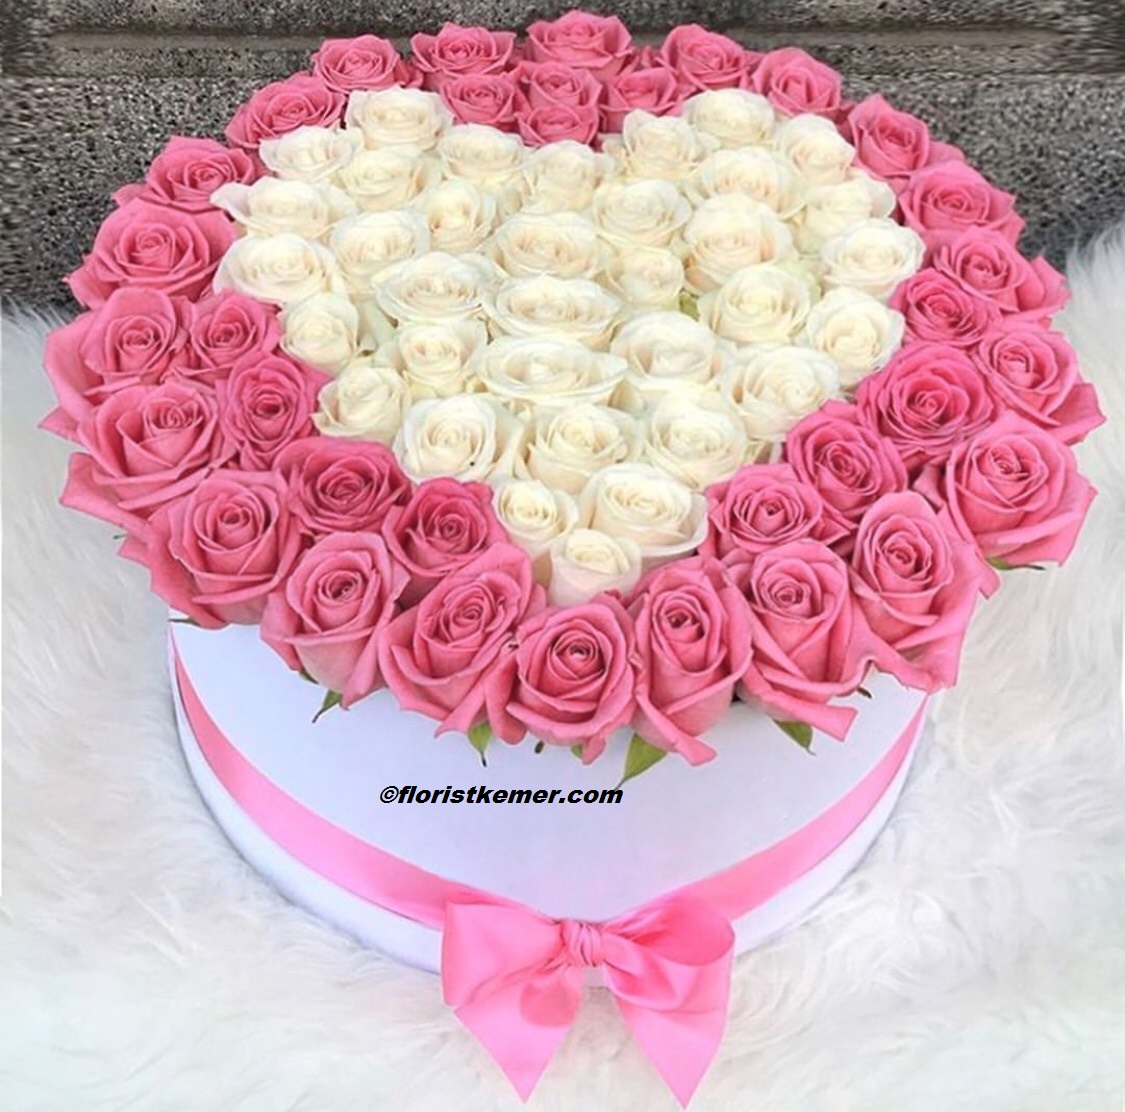  Kemer Flower Order Heart Rose Pink White 71 pcs in a Cylinder Box